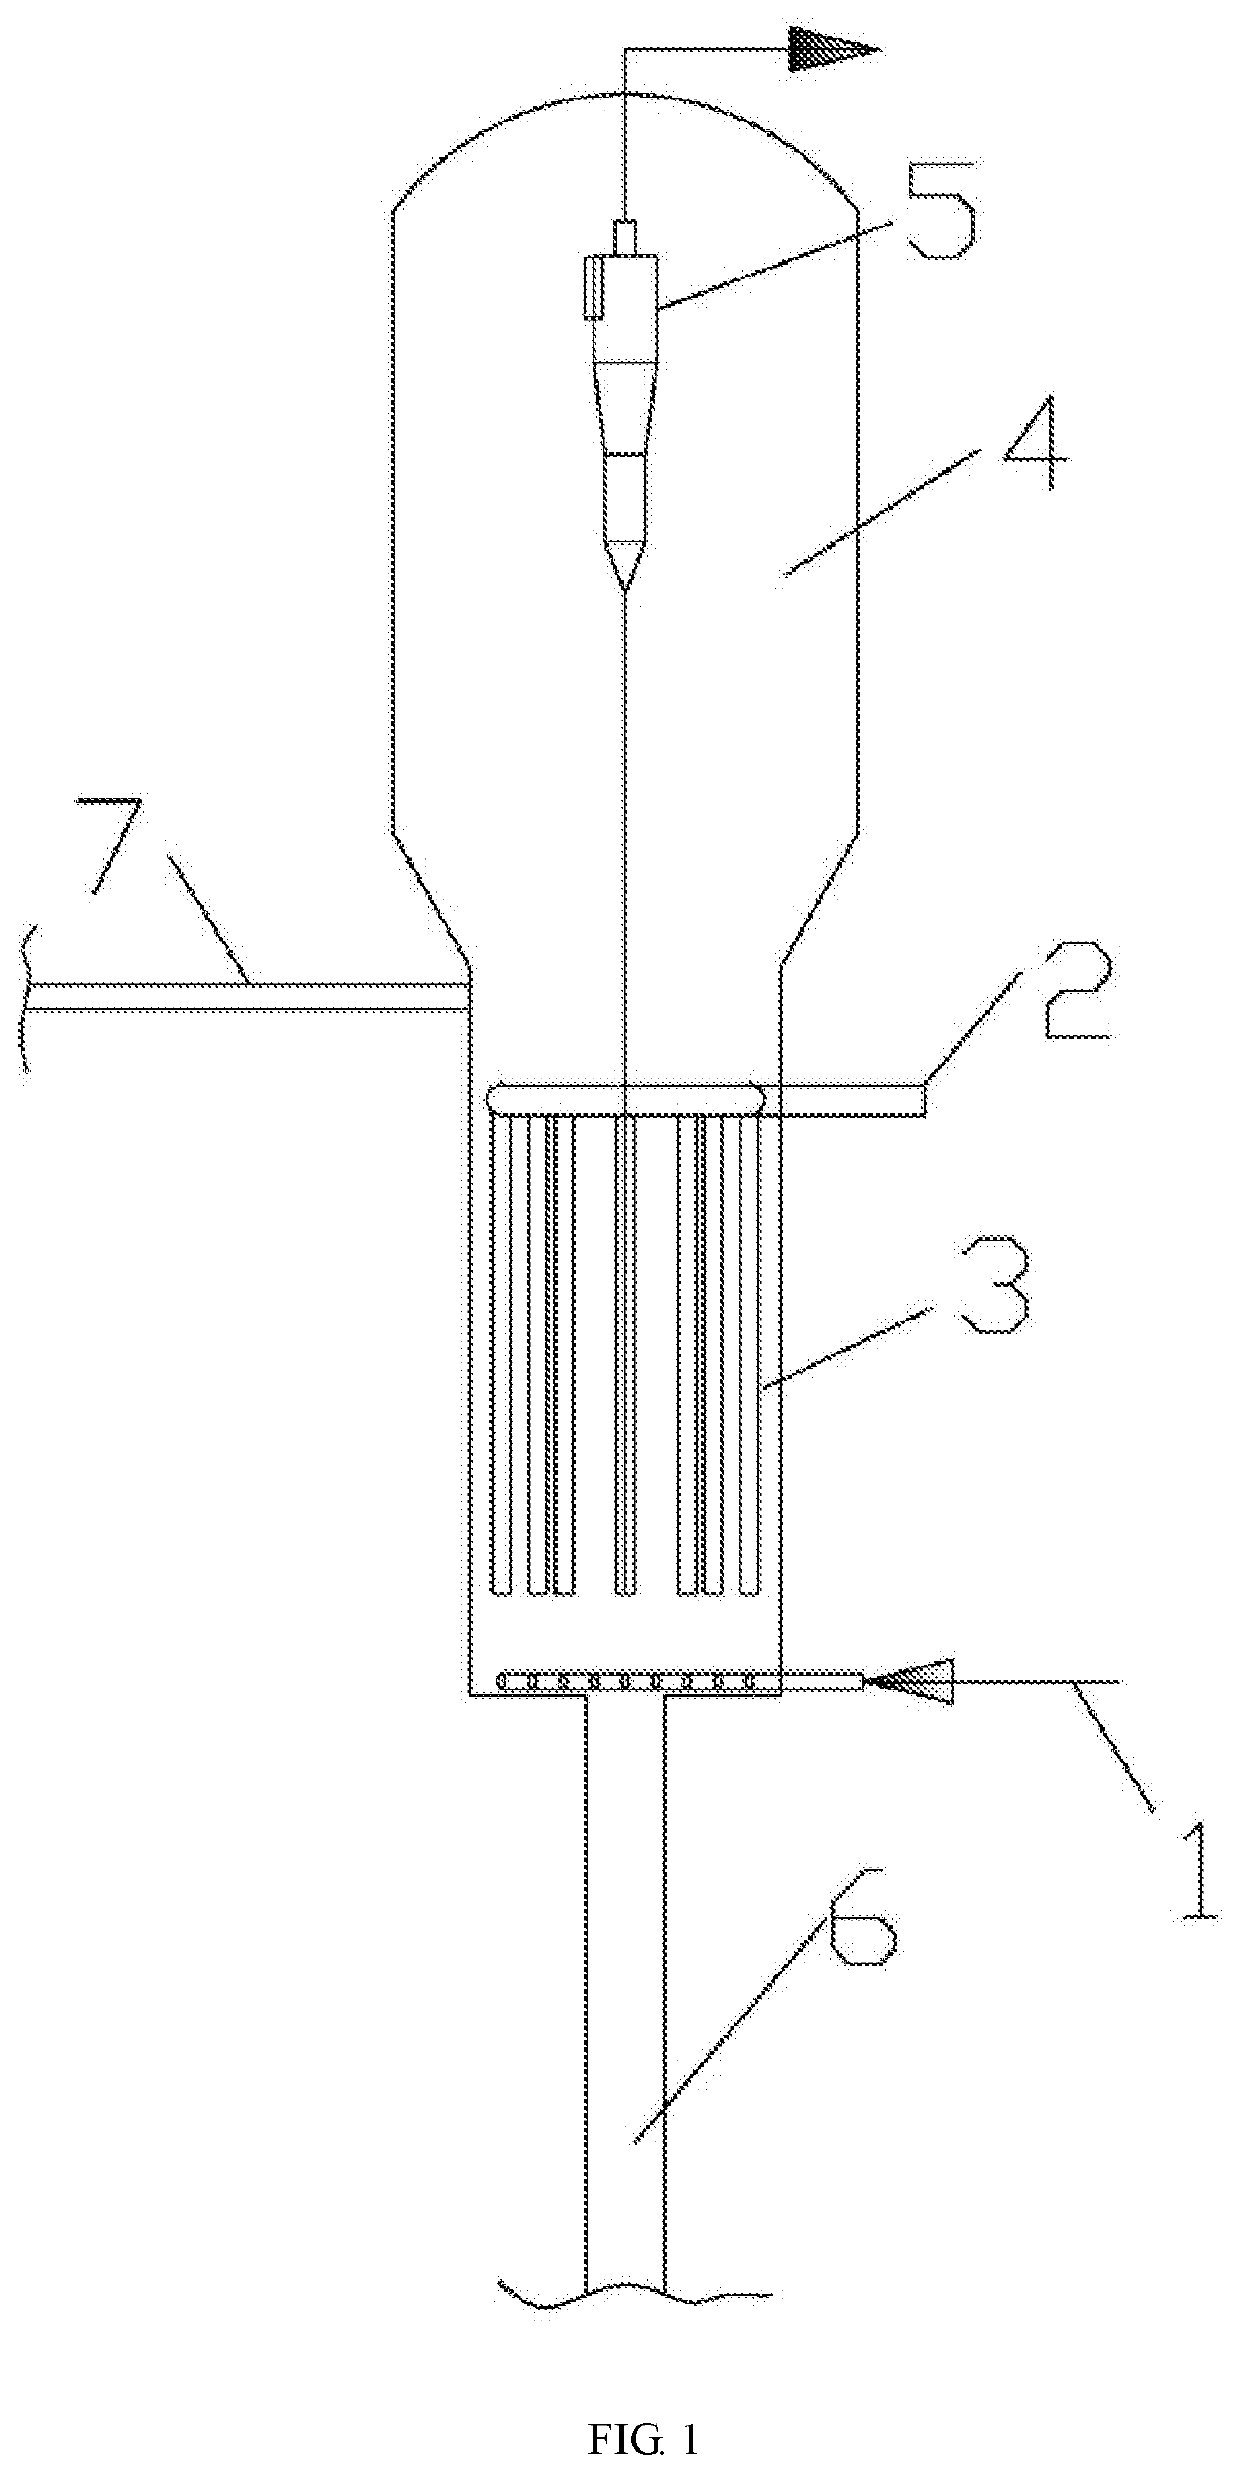 Fluidized bed gas distributor, reactor using fluidized bed gas distributor, and method for producing para-xylene and co-producing light olefins